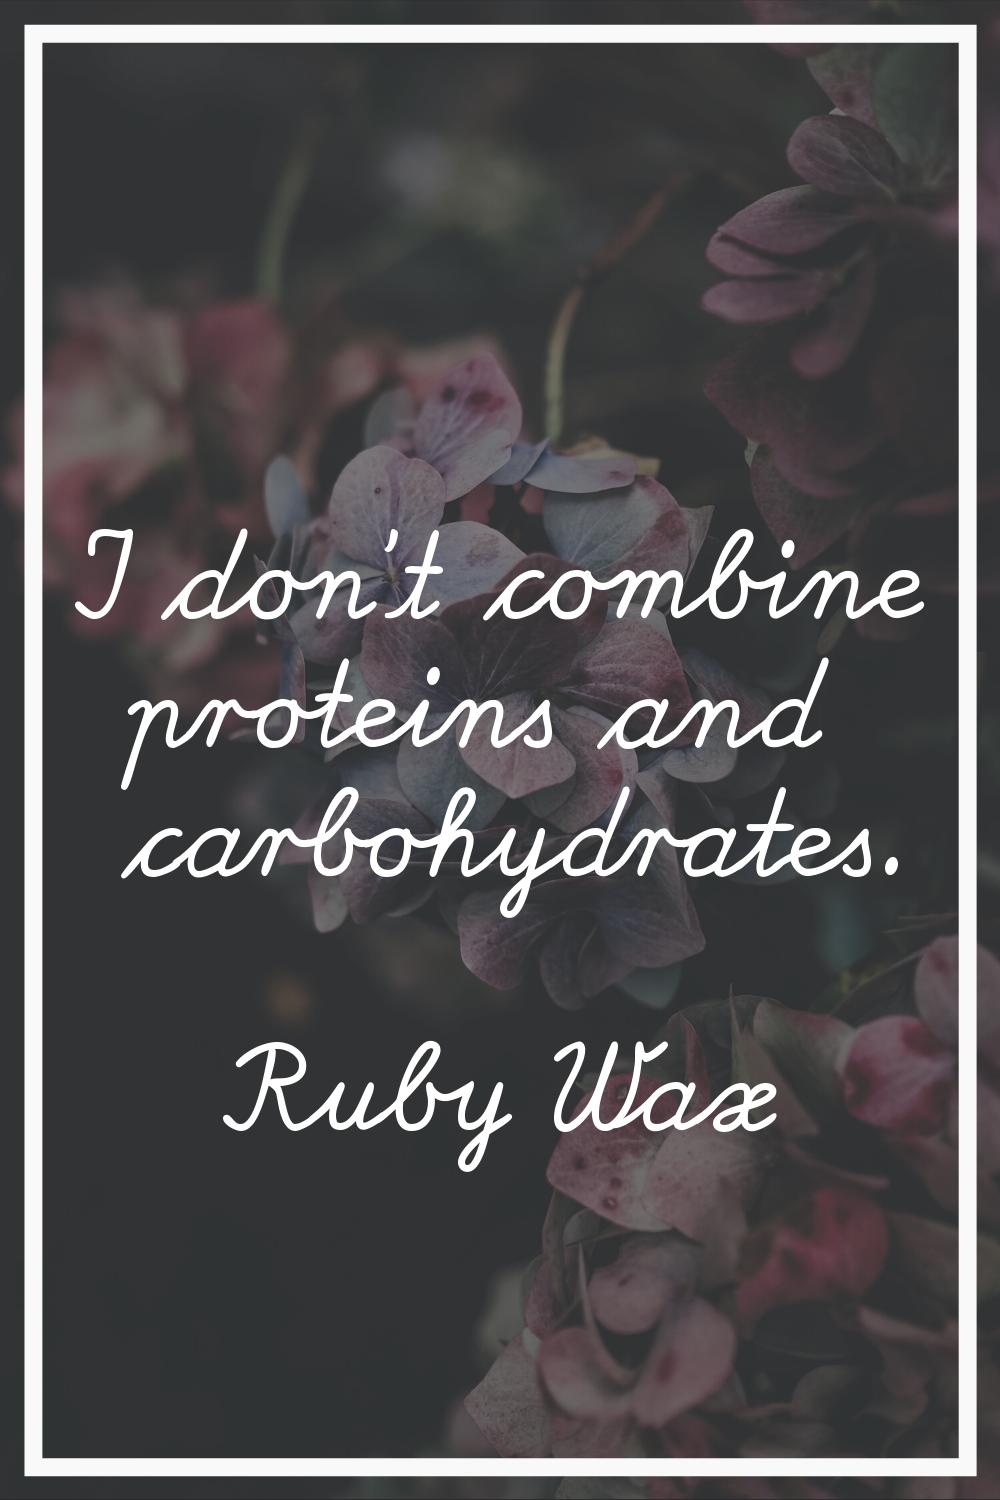 I don't combine proteins and carbohydrates.